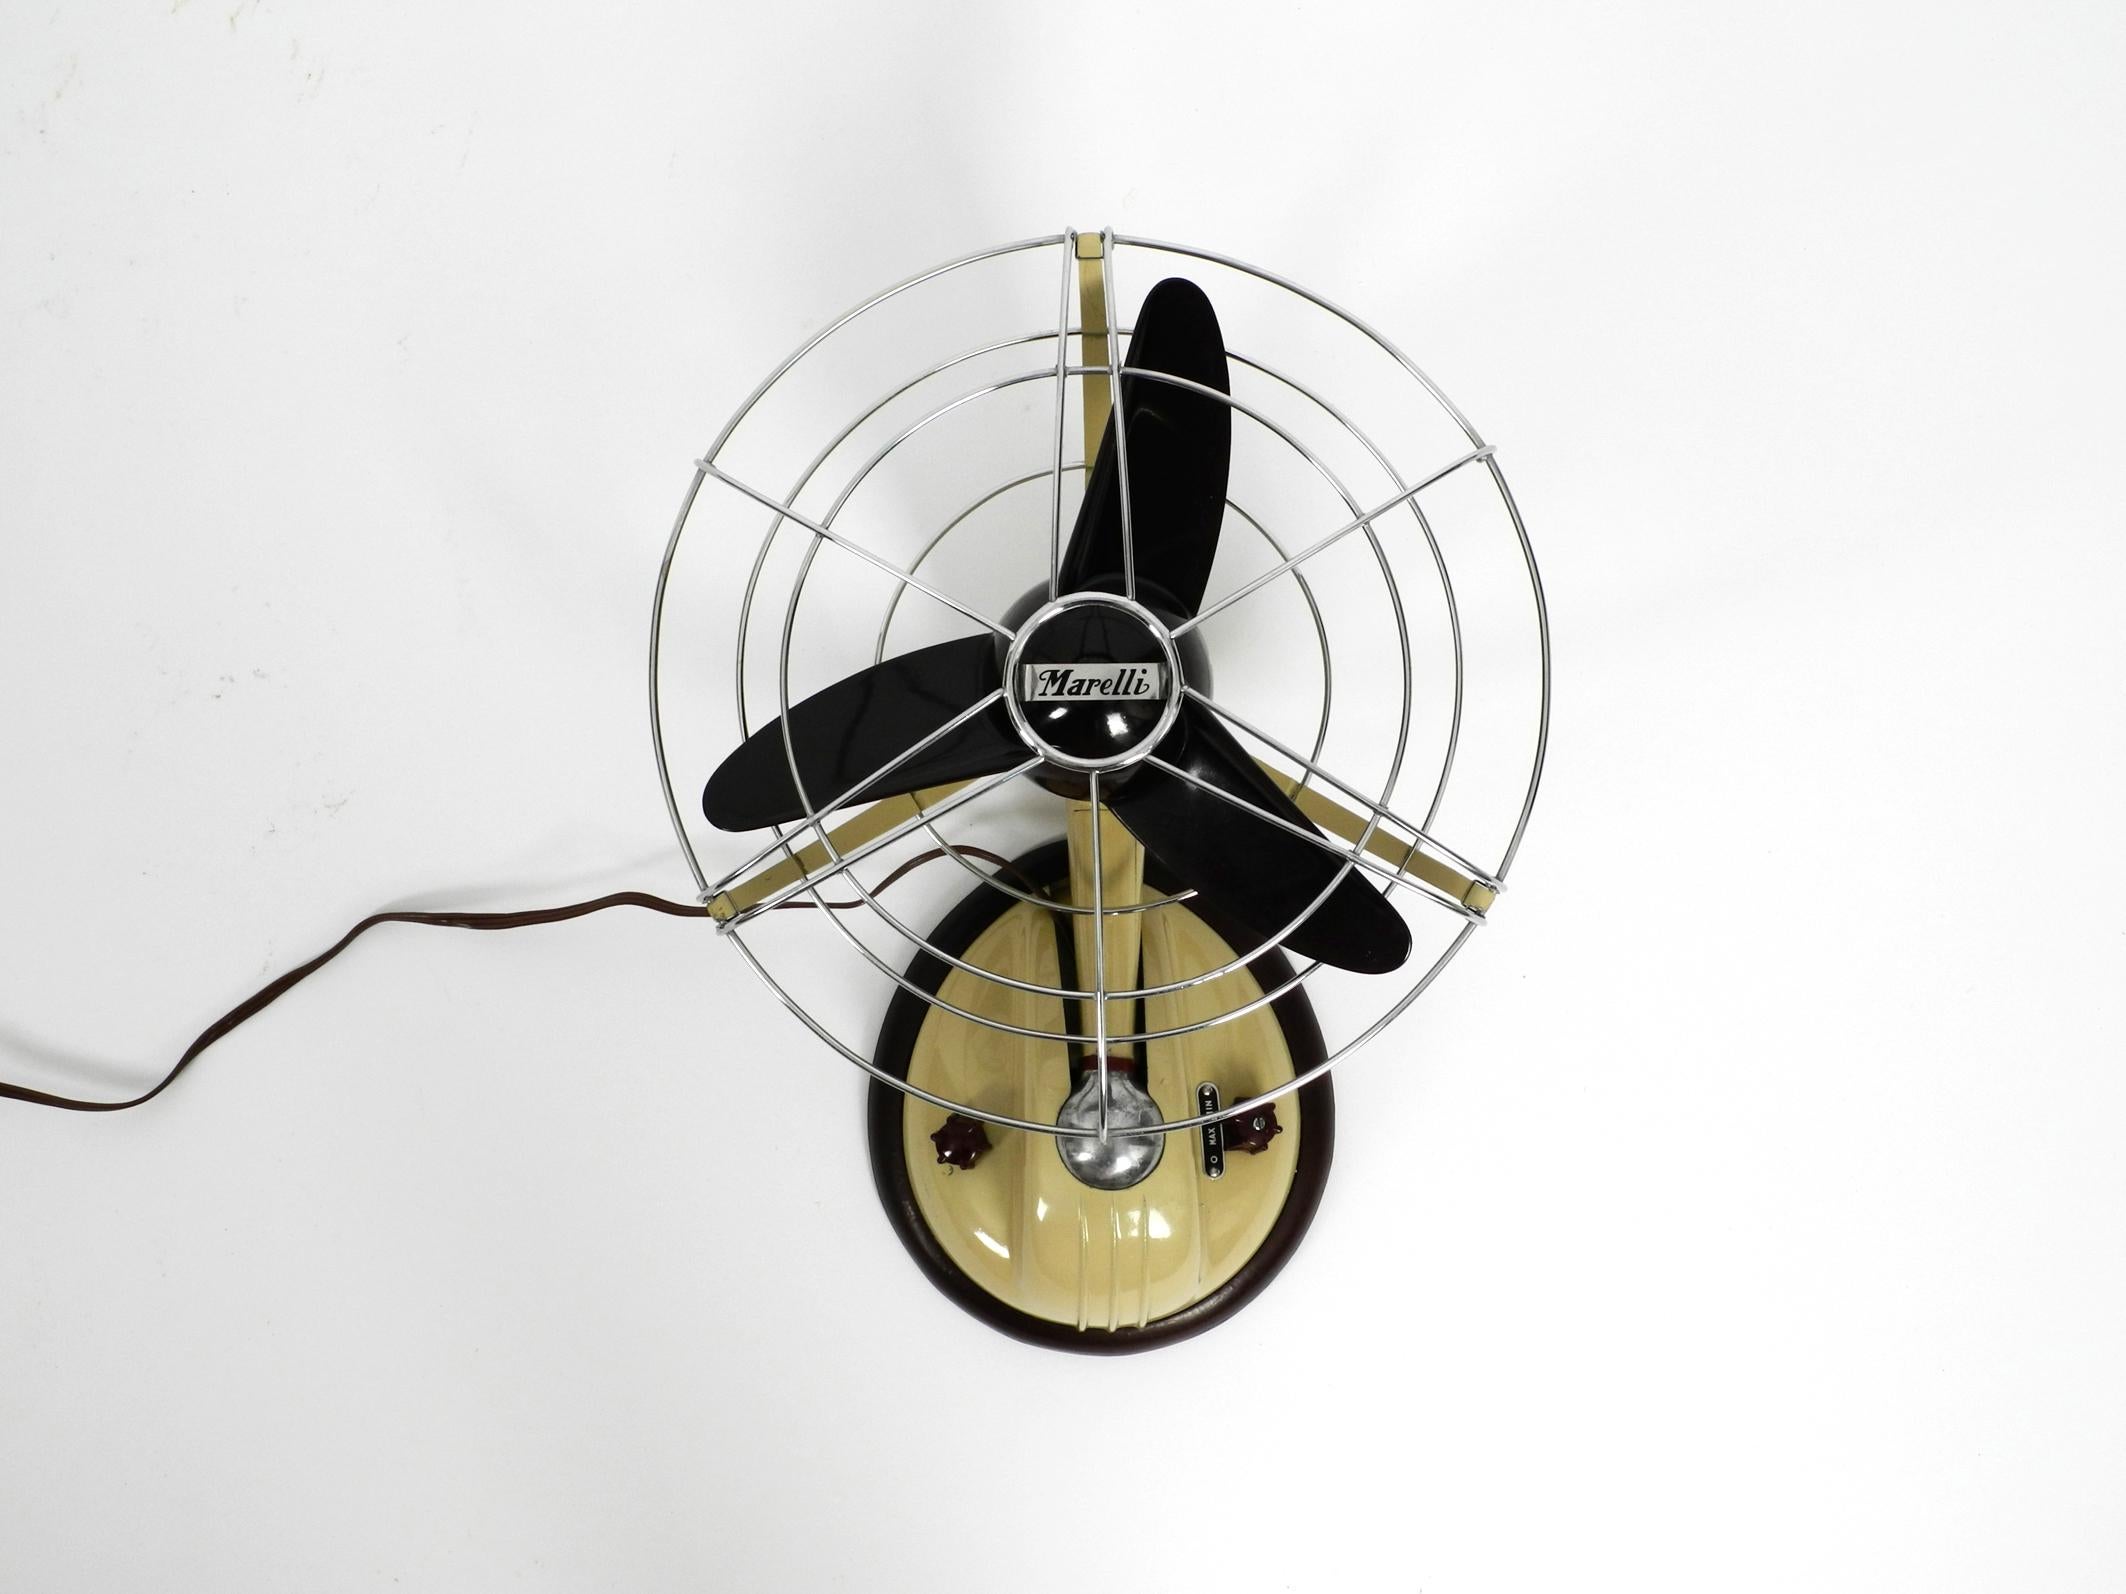 Original 1960s Streamline Table and Wall Fan by Marelli Mod. 304 Made in Italy 3